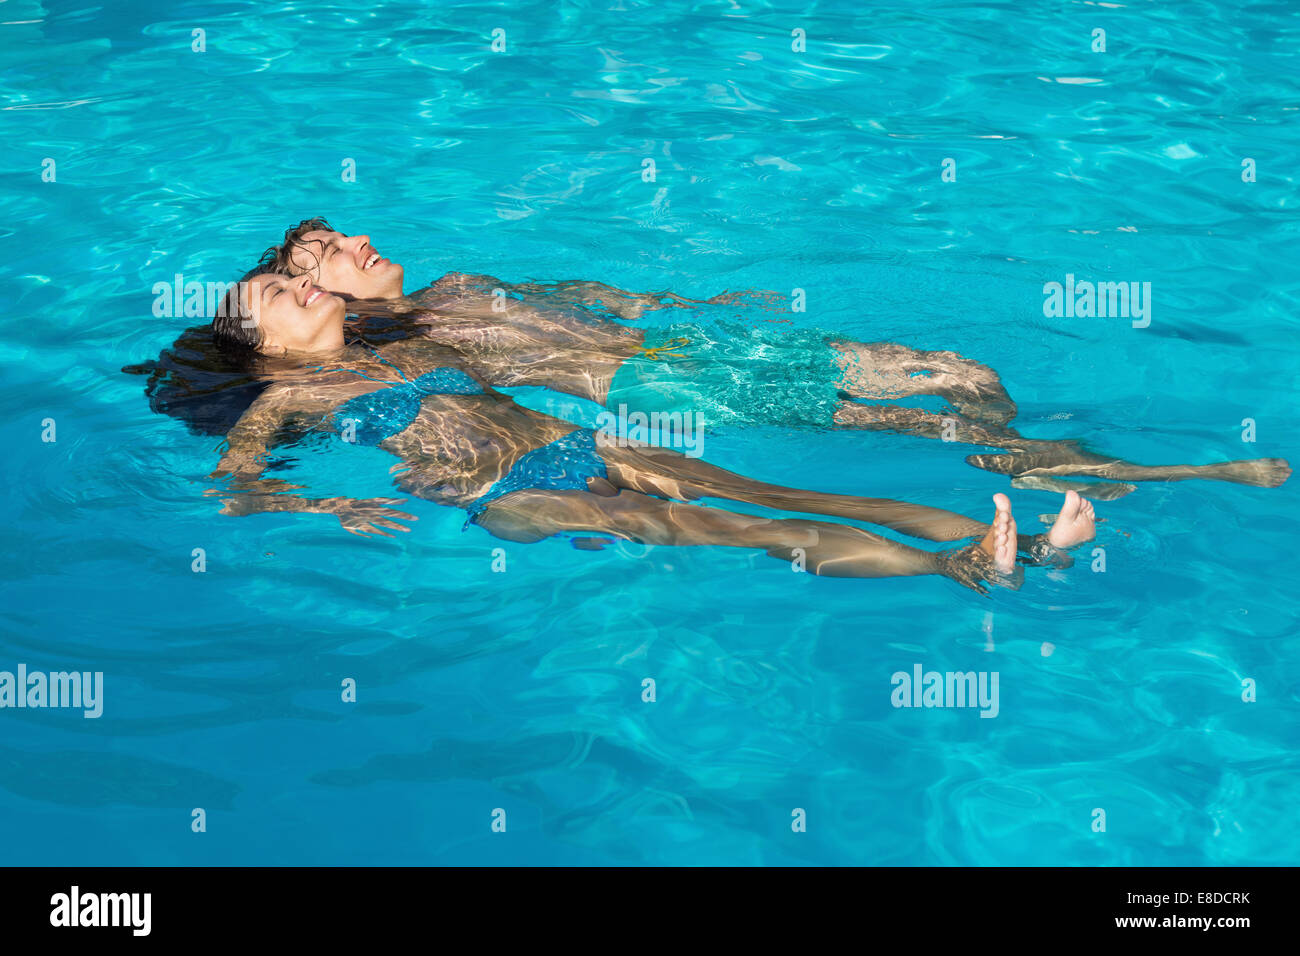 Relaxed young couple in swimming pool Stock Photo